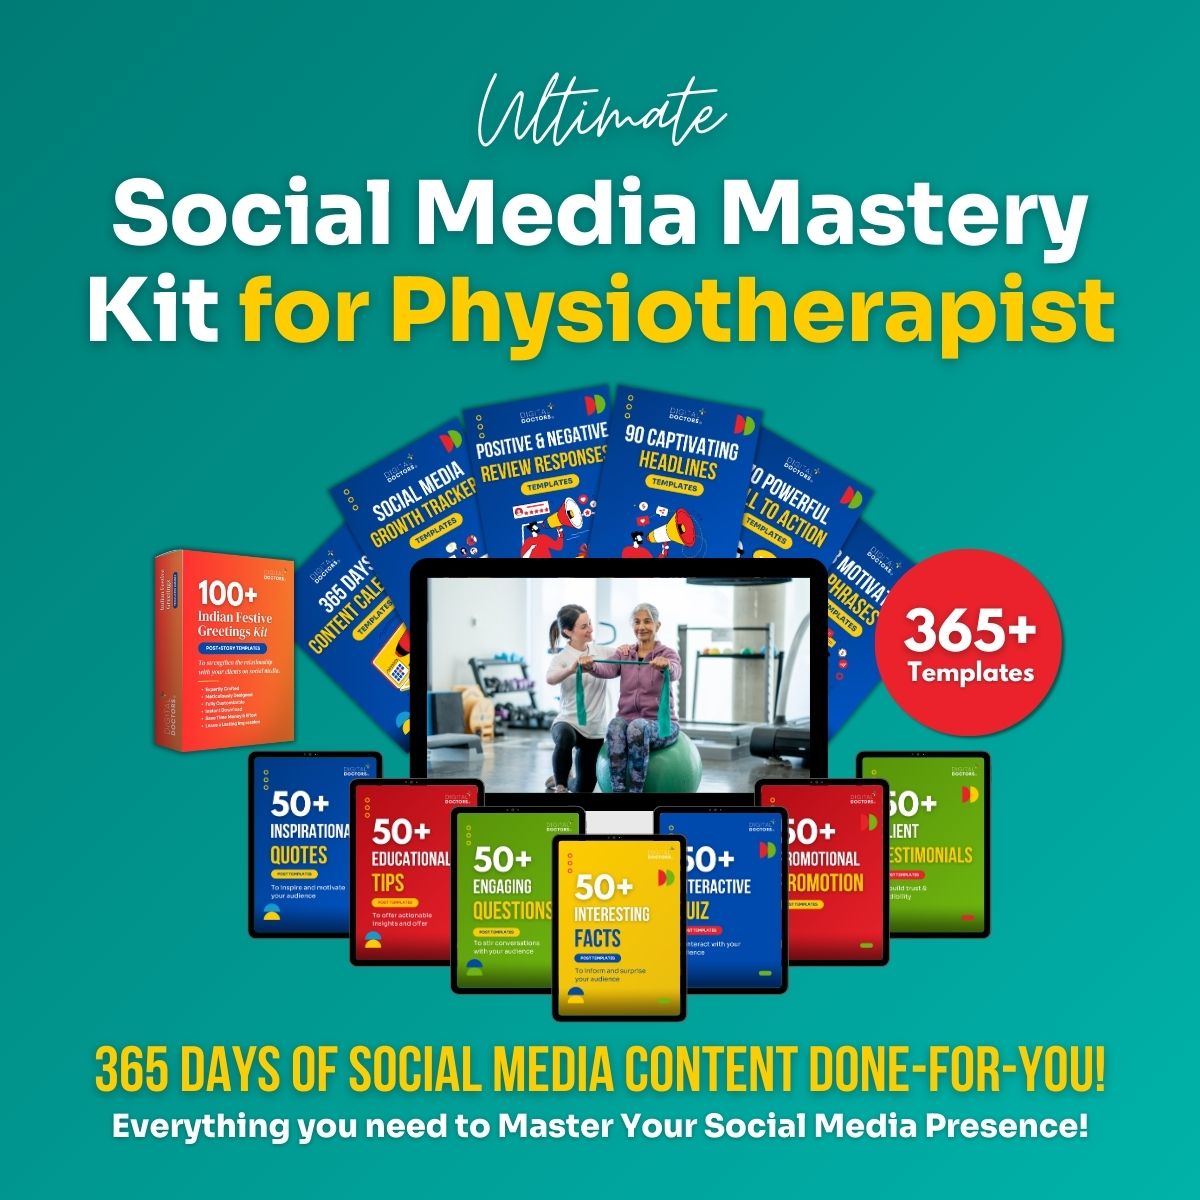 Ultimate Social Media Kit for Physiotherapist